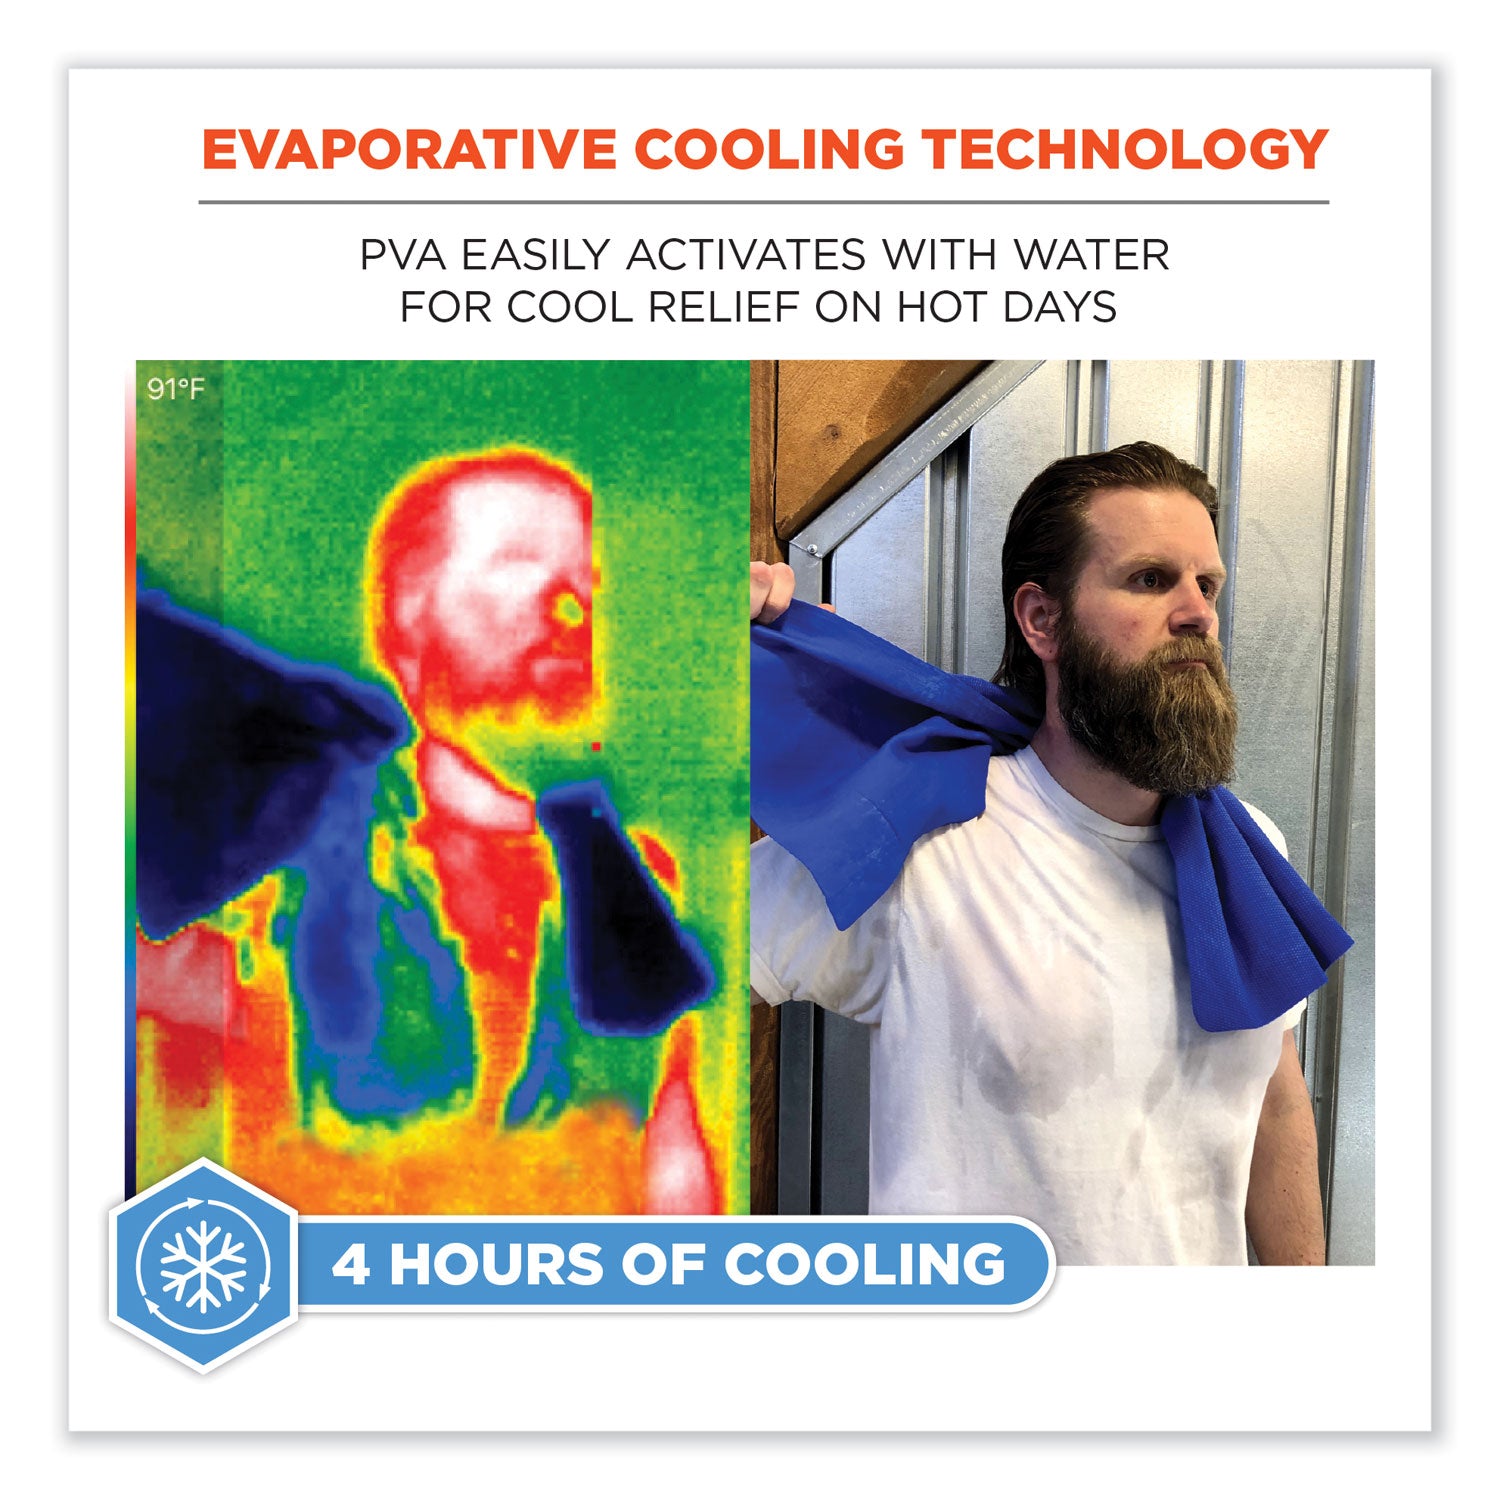 chill-its-6602-evaporative-pva-cooling-towel-295-x-13-one-size-fits-most-pva-blue-50-pack-ships-in-1-3-business-days_ego12410 - 8